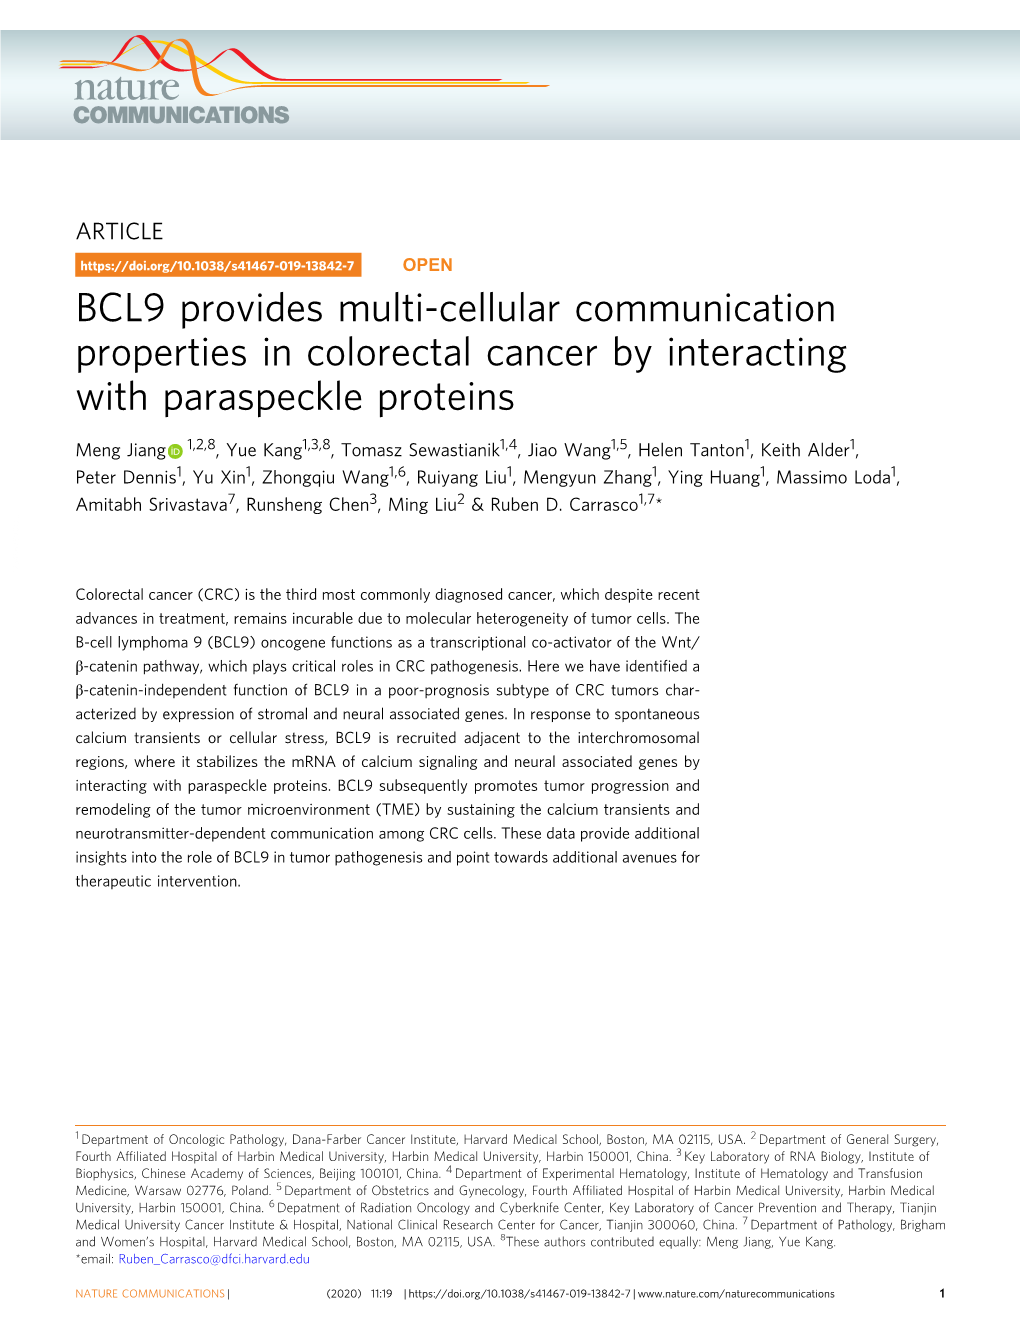 BCL9 Provides Multi-Cellular Communication Properties in Colorectal Cancer by Interacting with Paraspeckle Proteins